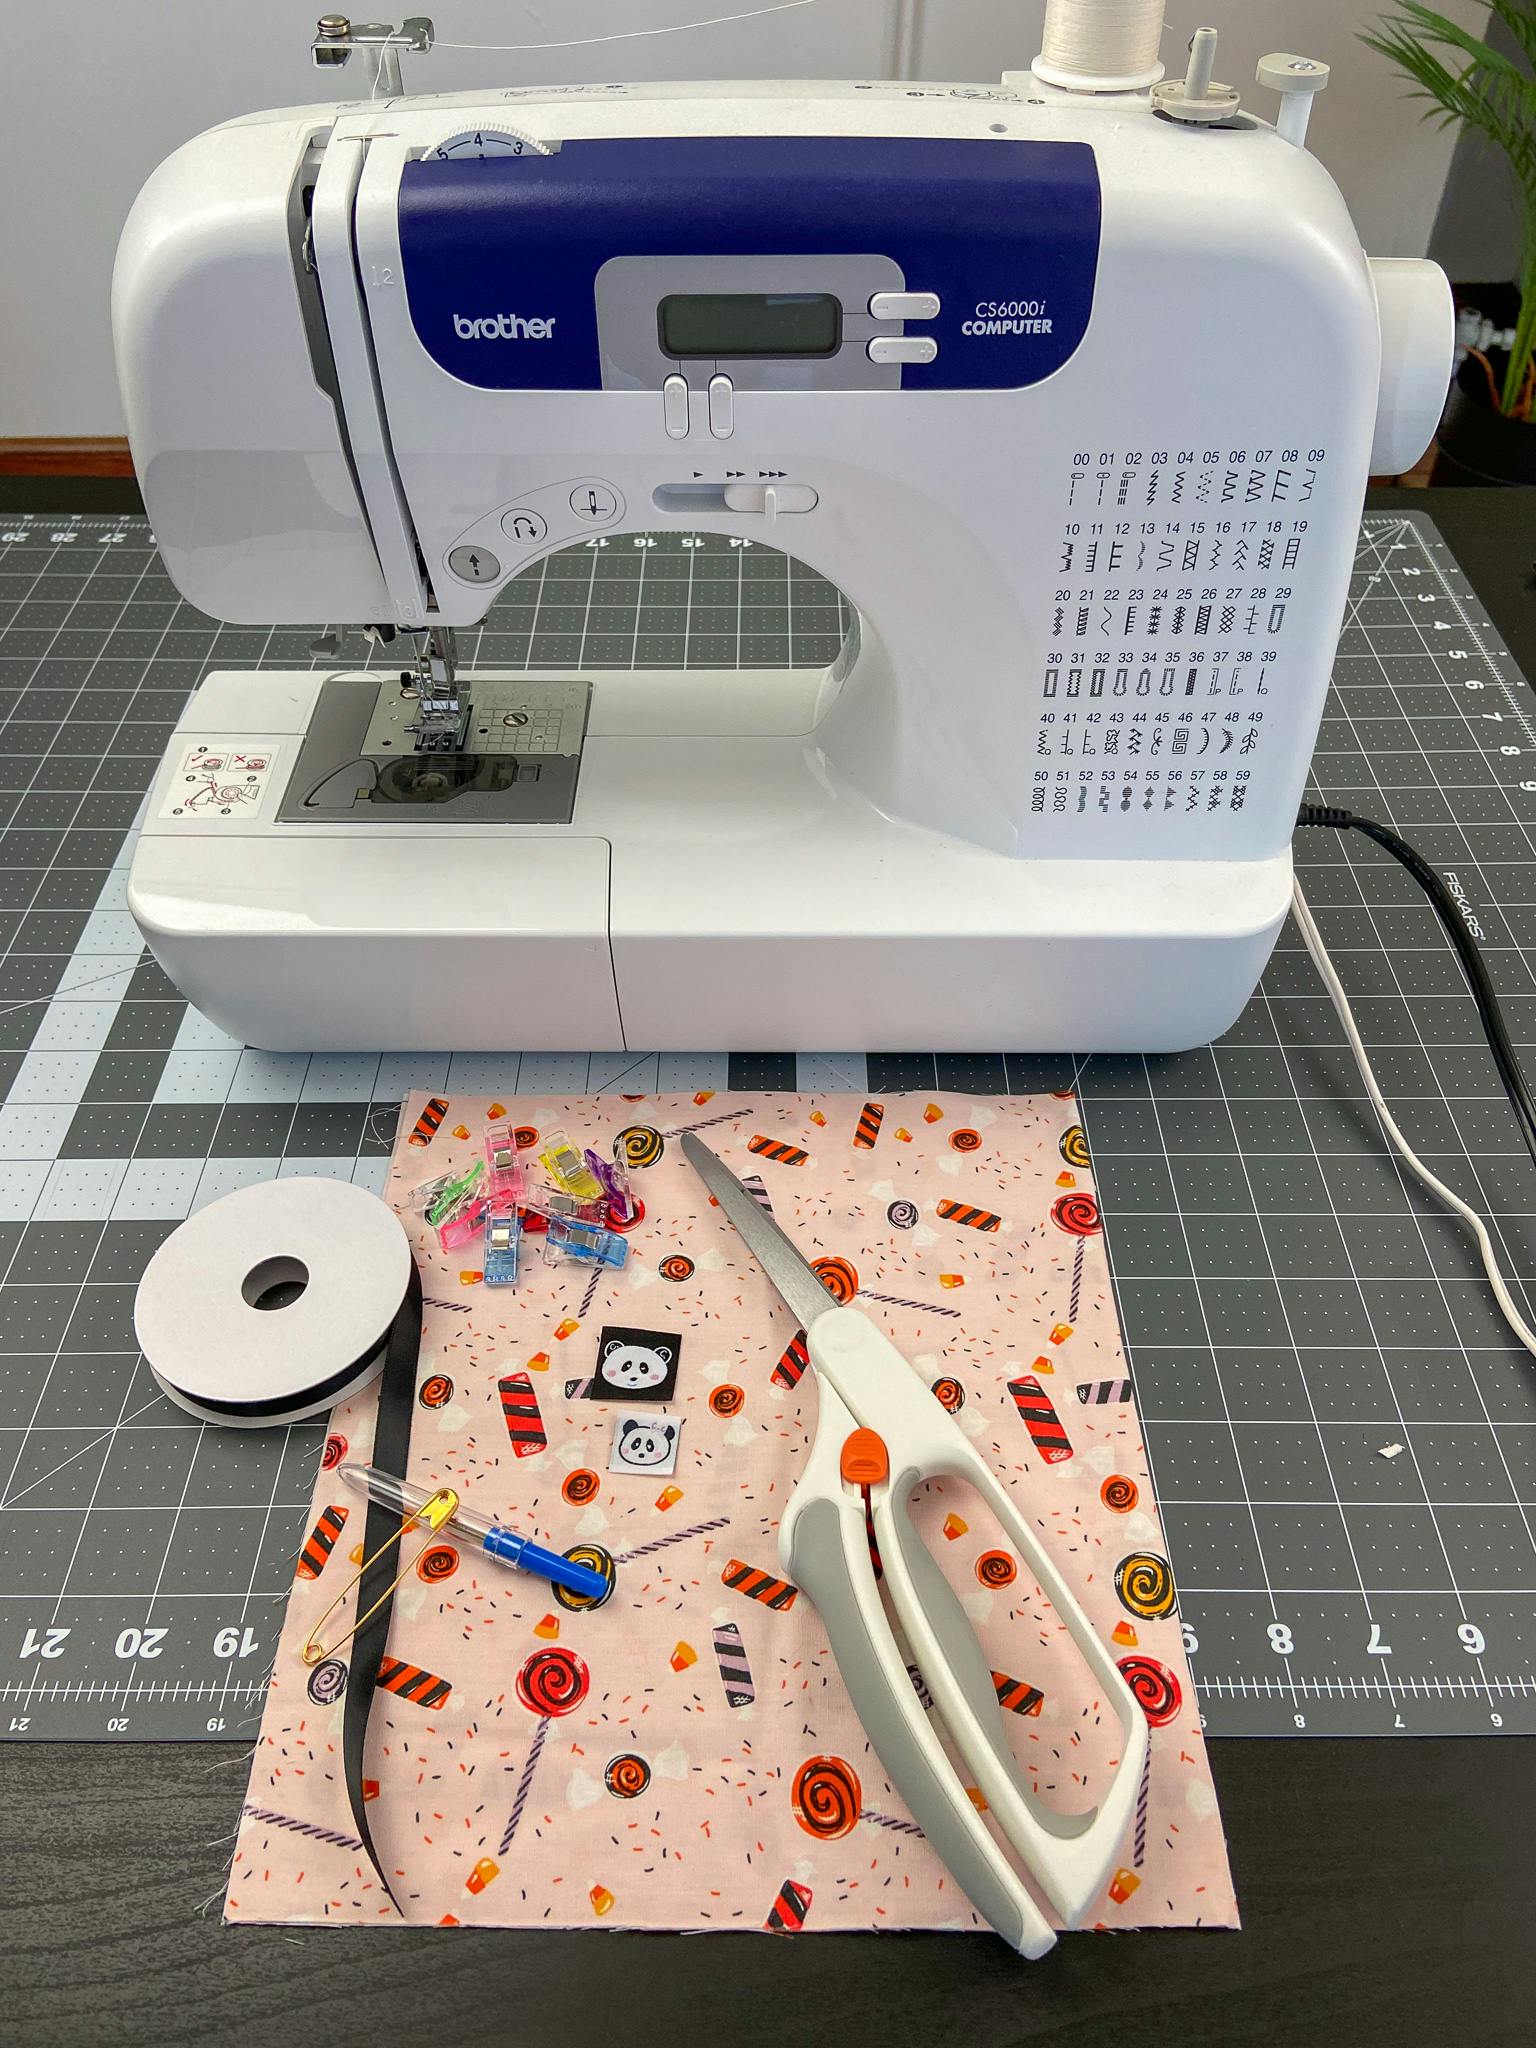  sewing machine with supplies